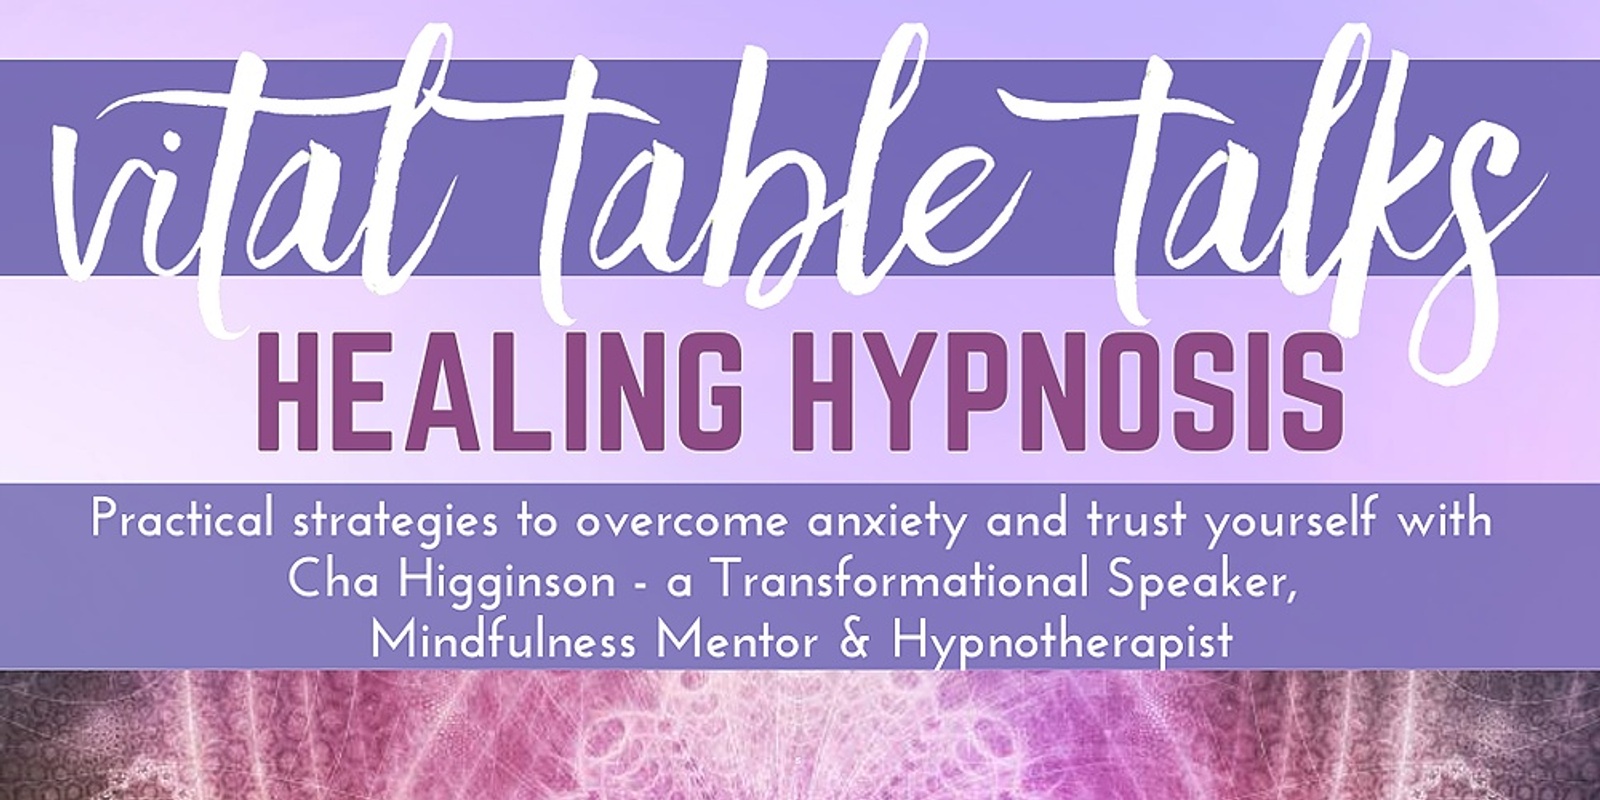 Banner image for Vital Table Talks - Healing Hypnosis with Cha Higginson